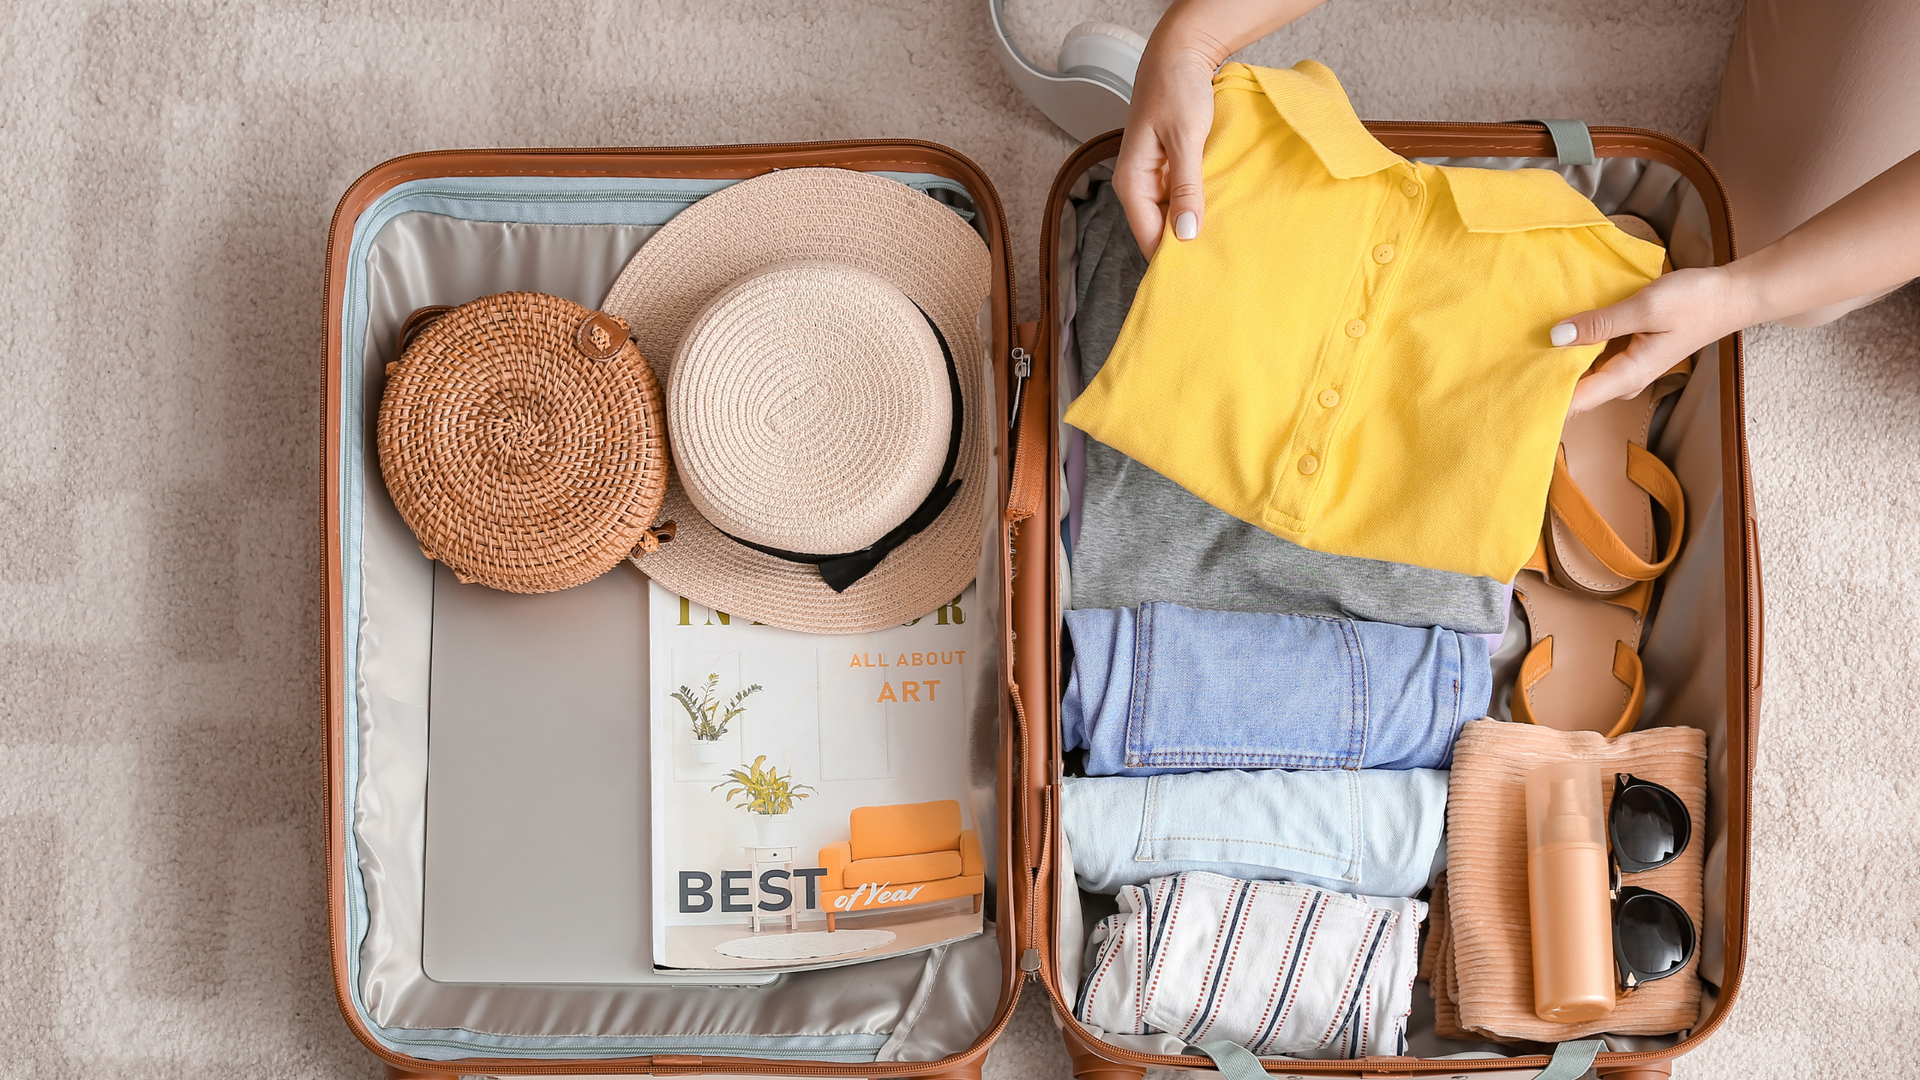 A person is packing a suitcase with clothes and a hat.